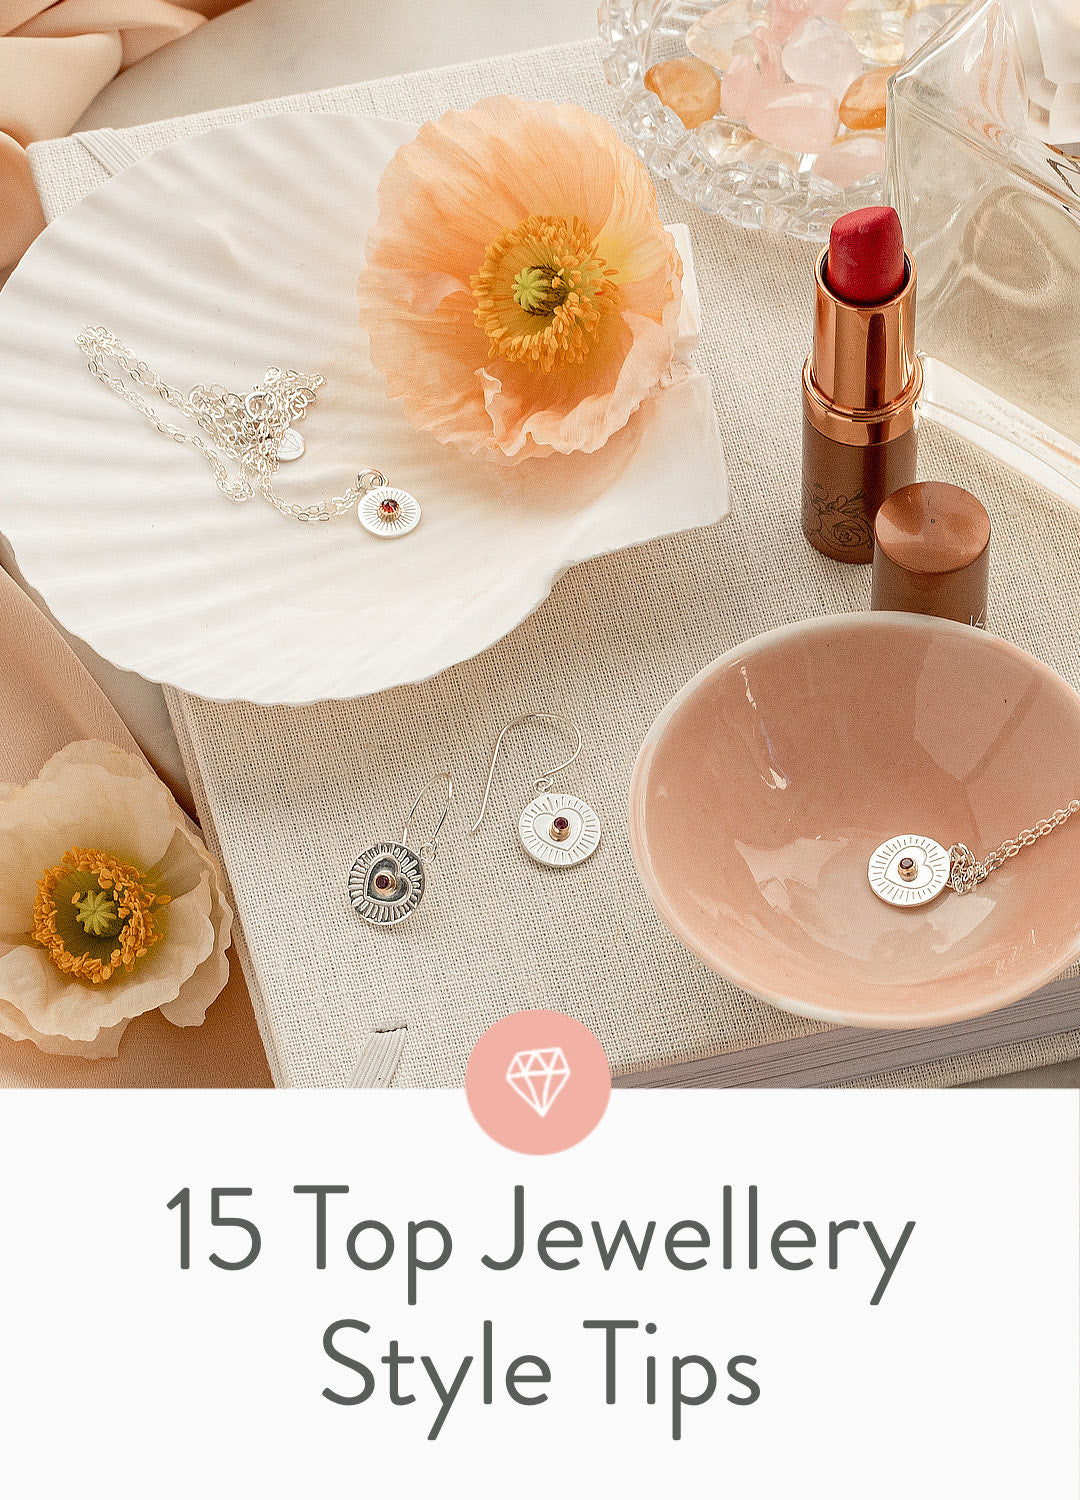 Jewellery style guide: our top 15 jewellery style tips so you can style your jewellery like a pro.